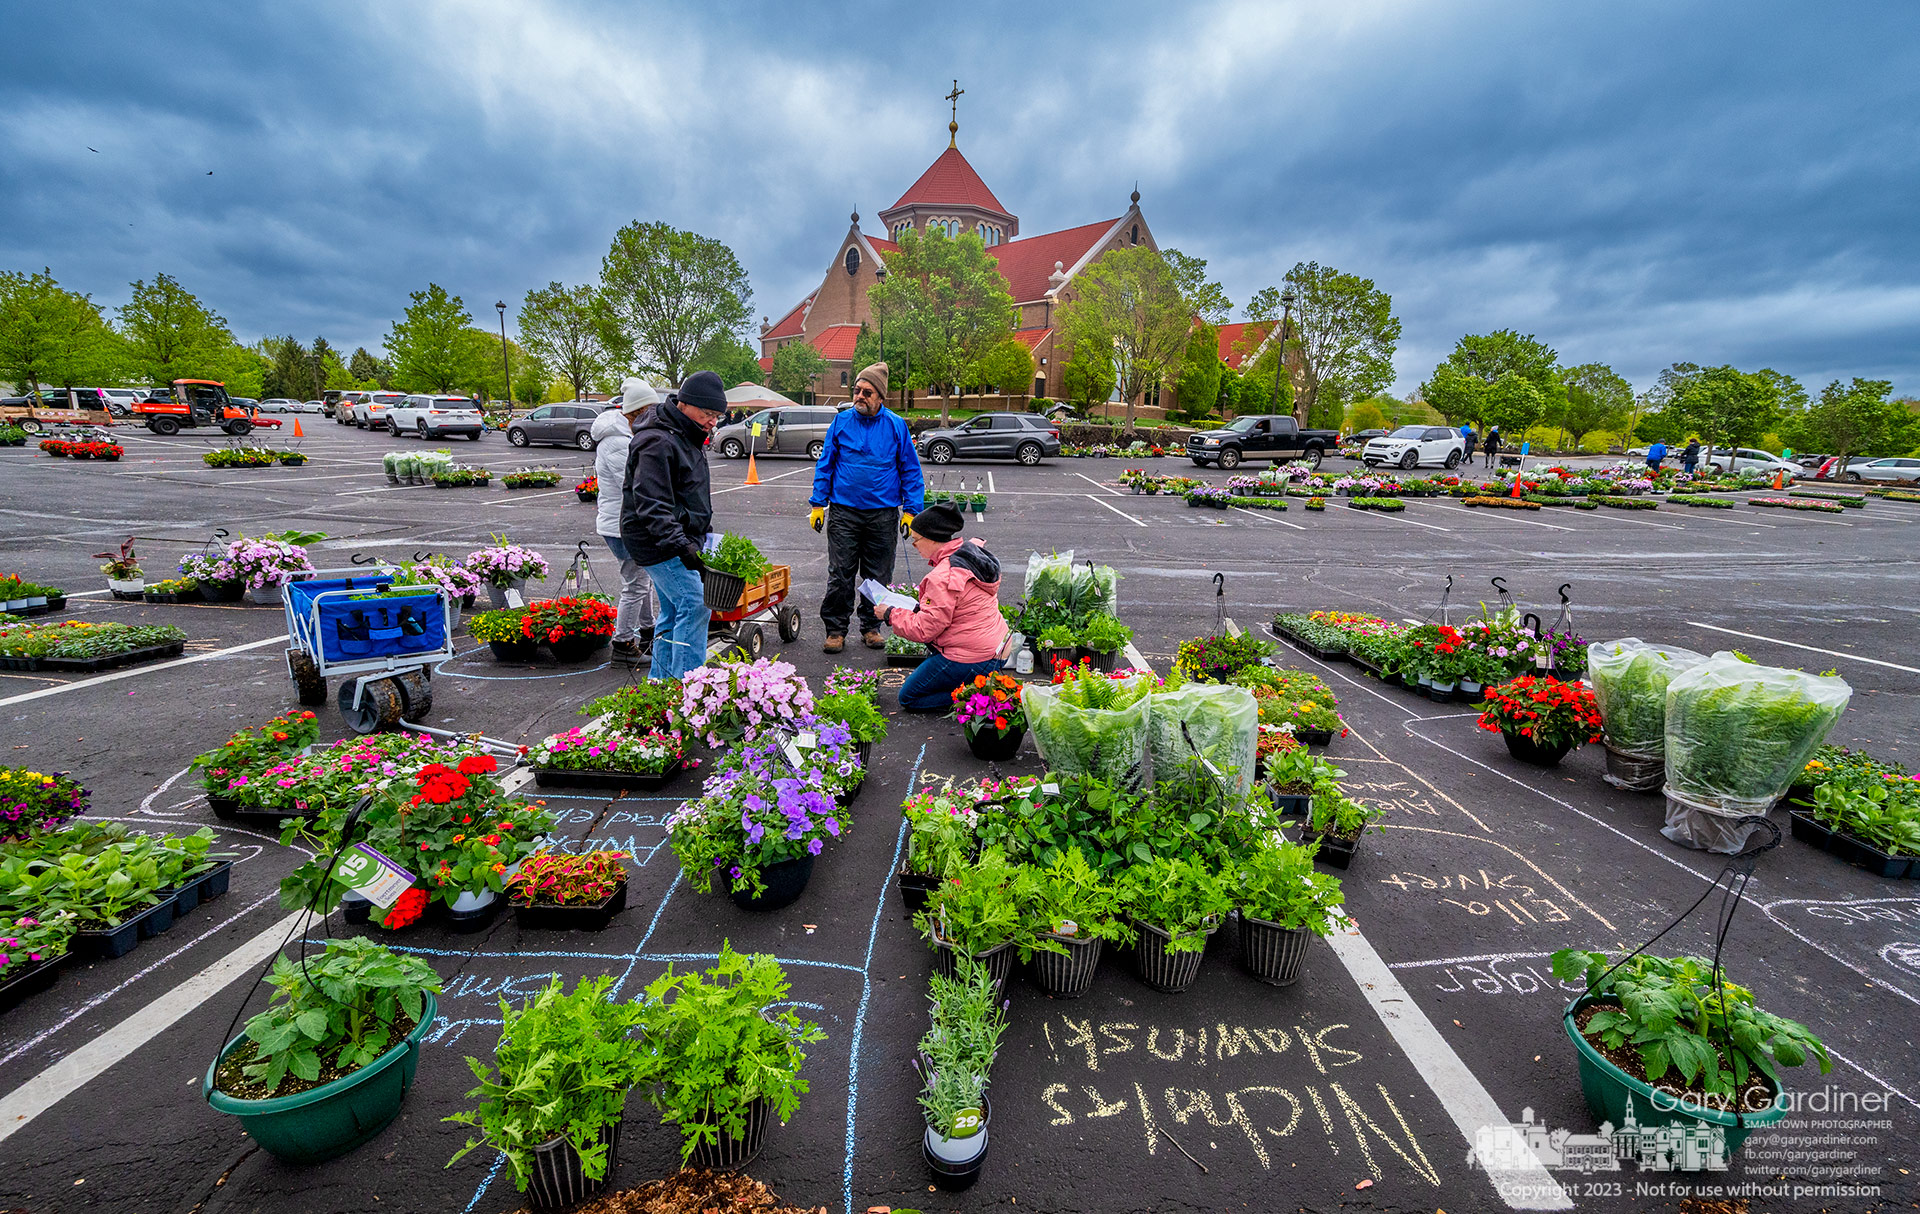 Volunteers prepare to load flowers and plants sorted by family name into vehicles picking up items from the annual plant sale at St. Paul the Apostle School in Westerville. My Final Photo for May 3, 2023.